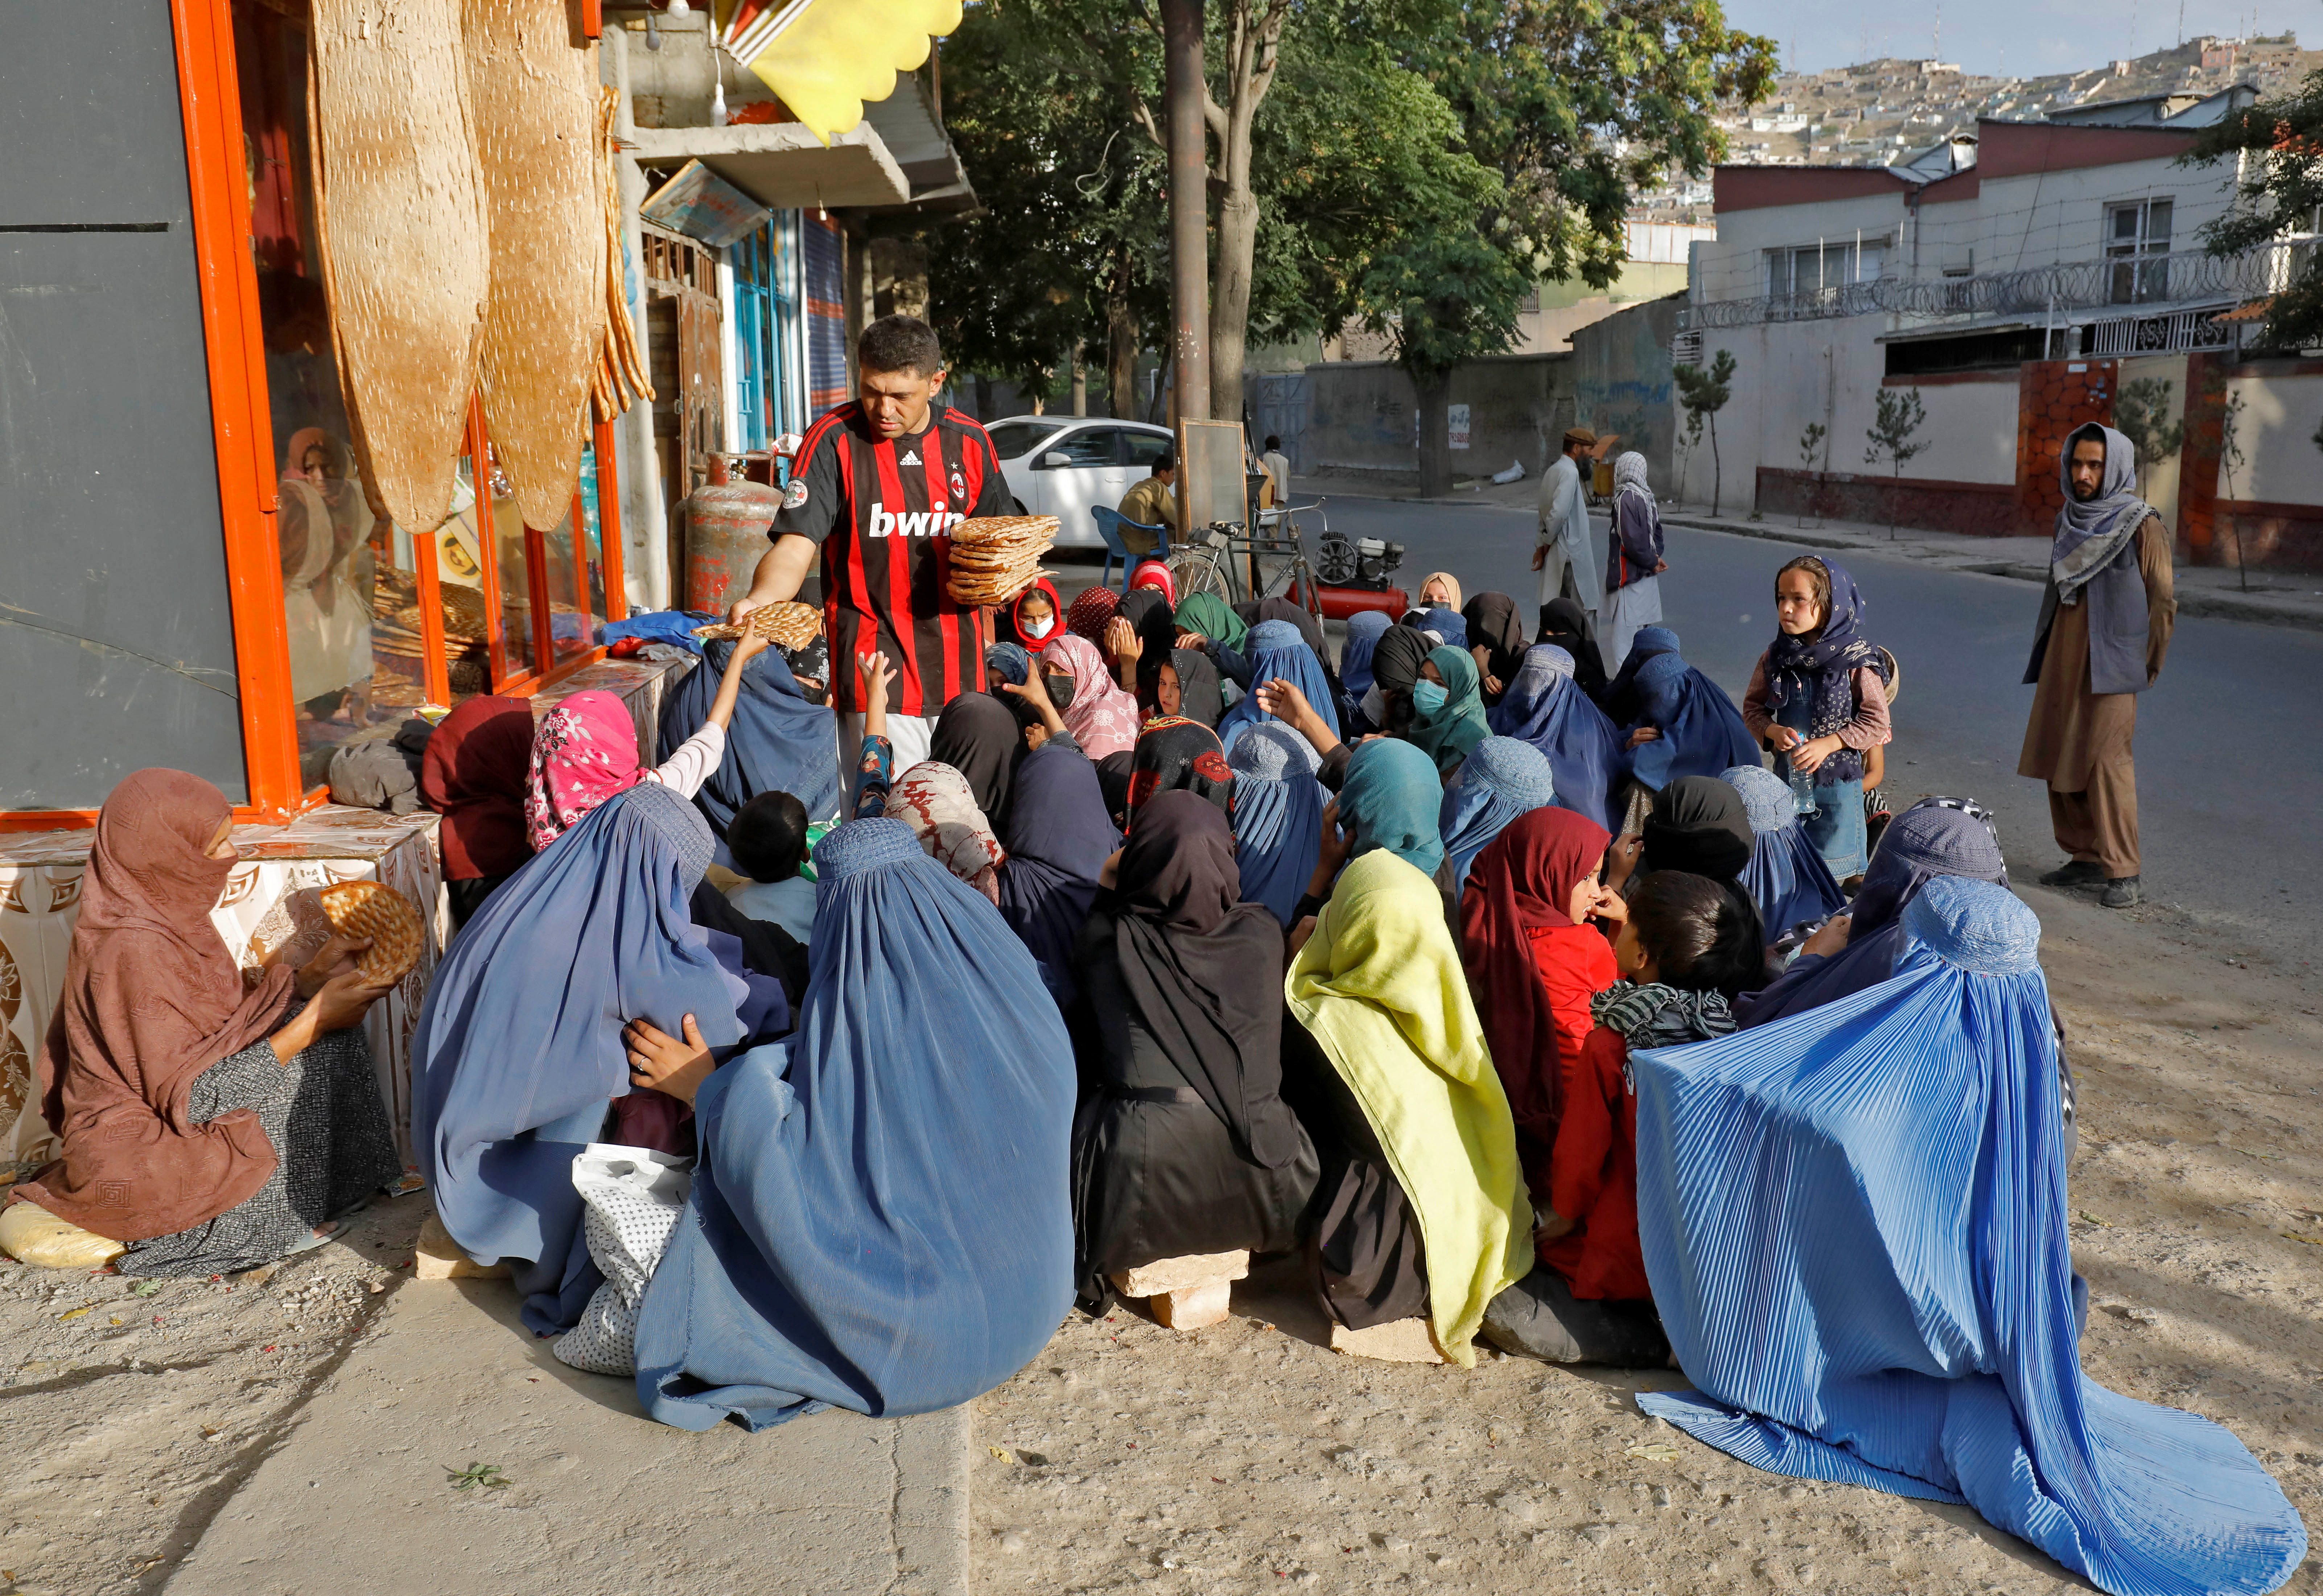 An Afghan girl receives a loaf of bread in front of a bakery among the crowd in Kabul